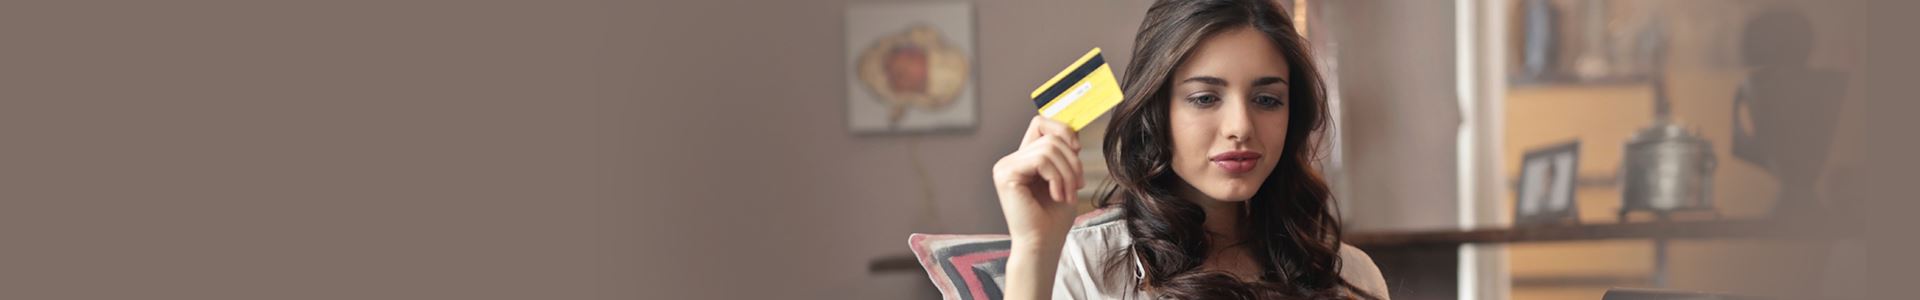 A brunette woman is sat leaning against a cushion and holding a yellow credit card in her right hand. She makes a small smile.